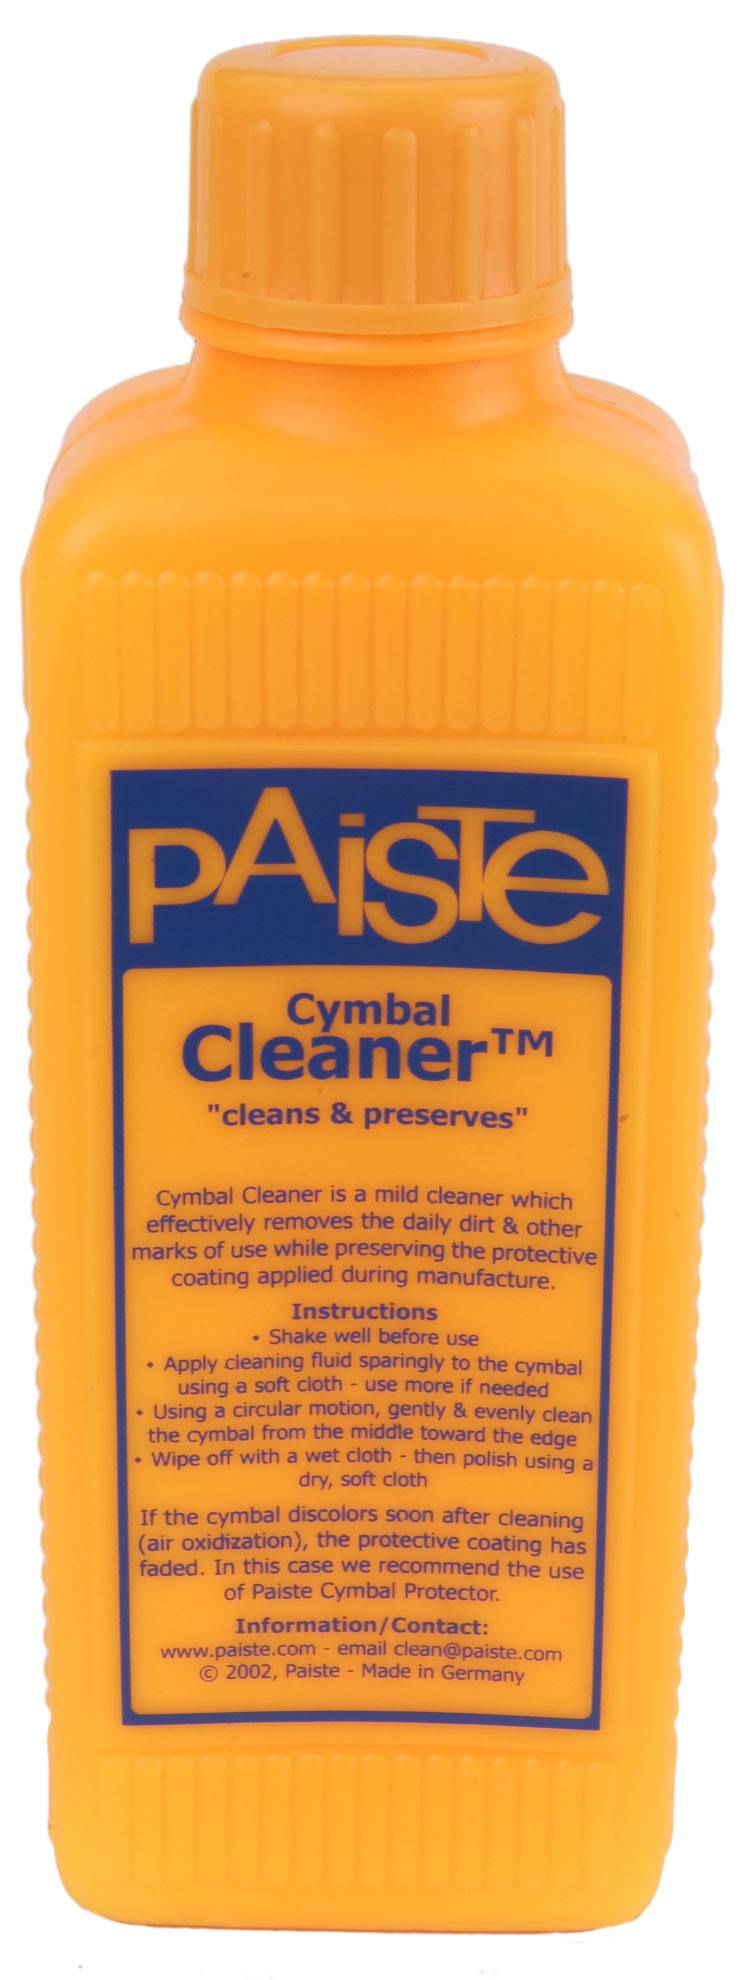 PAISTE Cymbal Cleaner Cream Cleaner